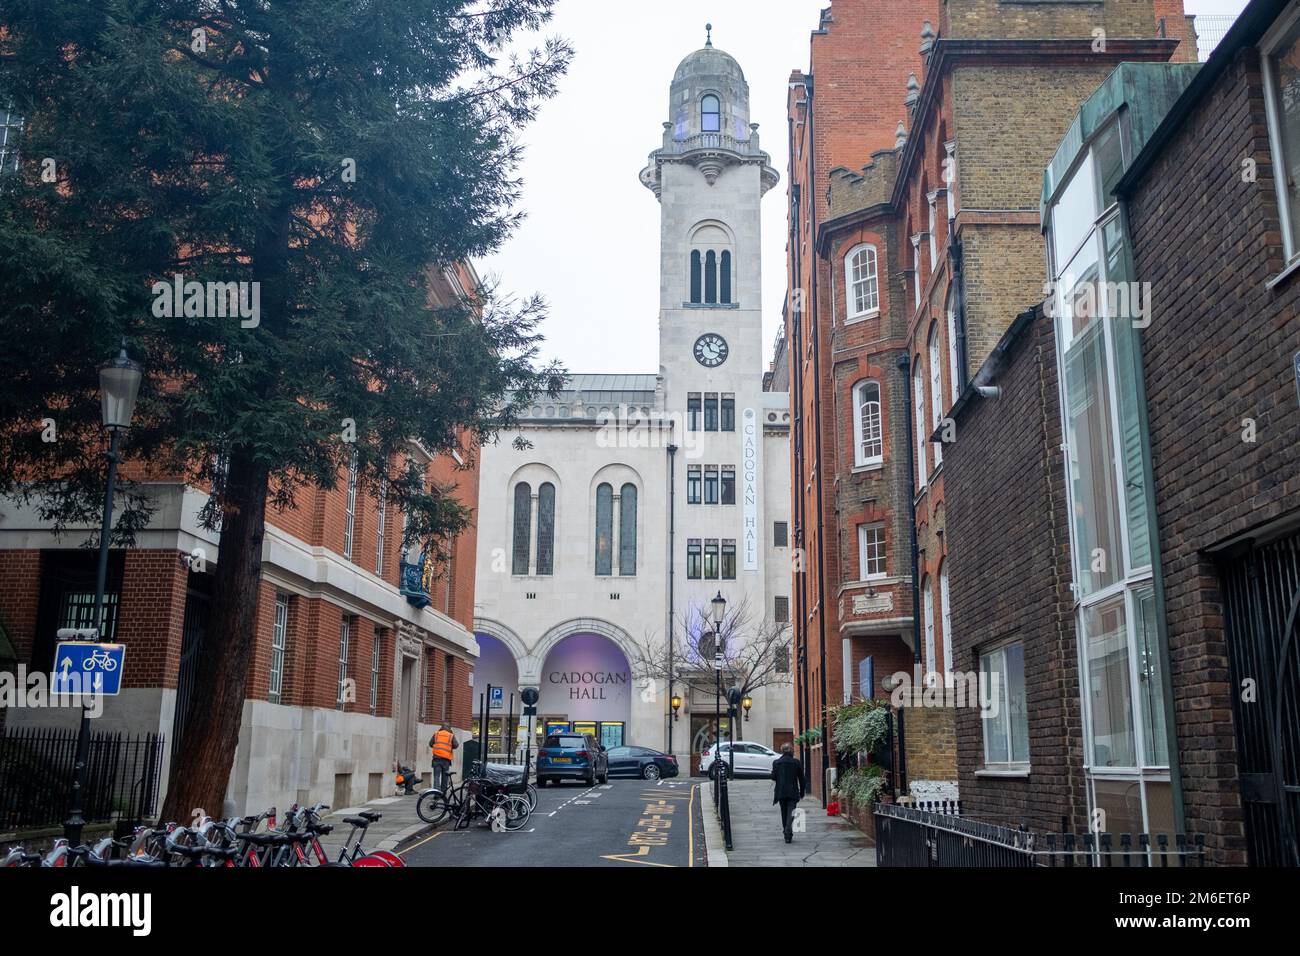 London- November 2022: Cadogan Hall- Early 20th century hall, home to the Royal Philharmonic Orchestra, with classical music programme. Stock Photo